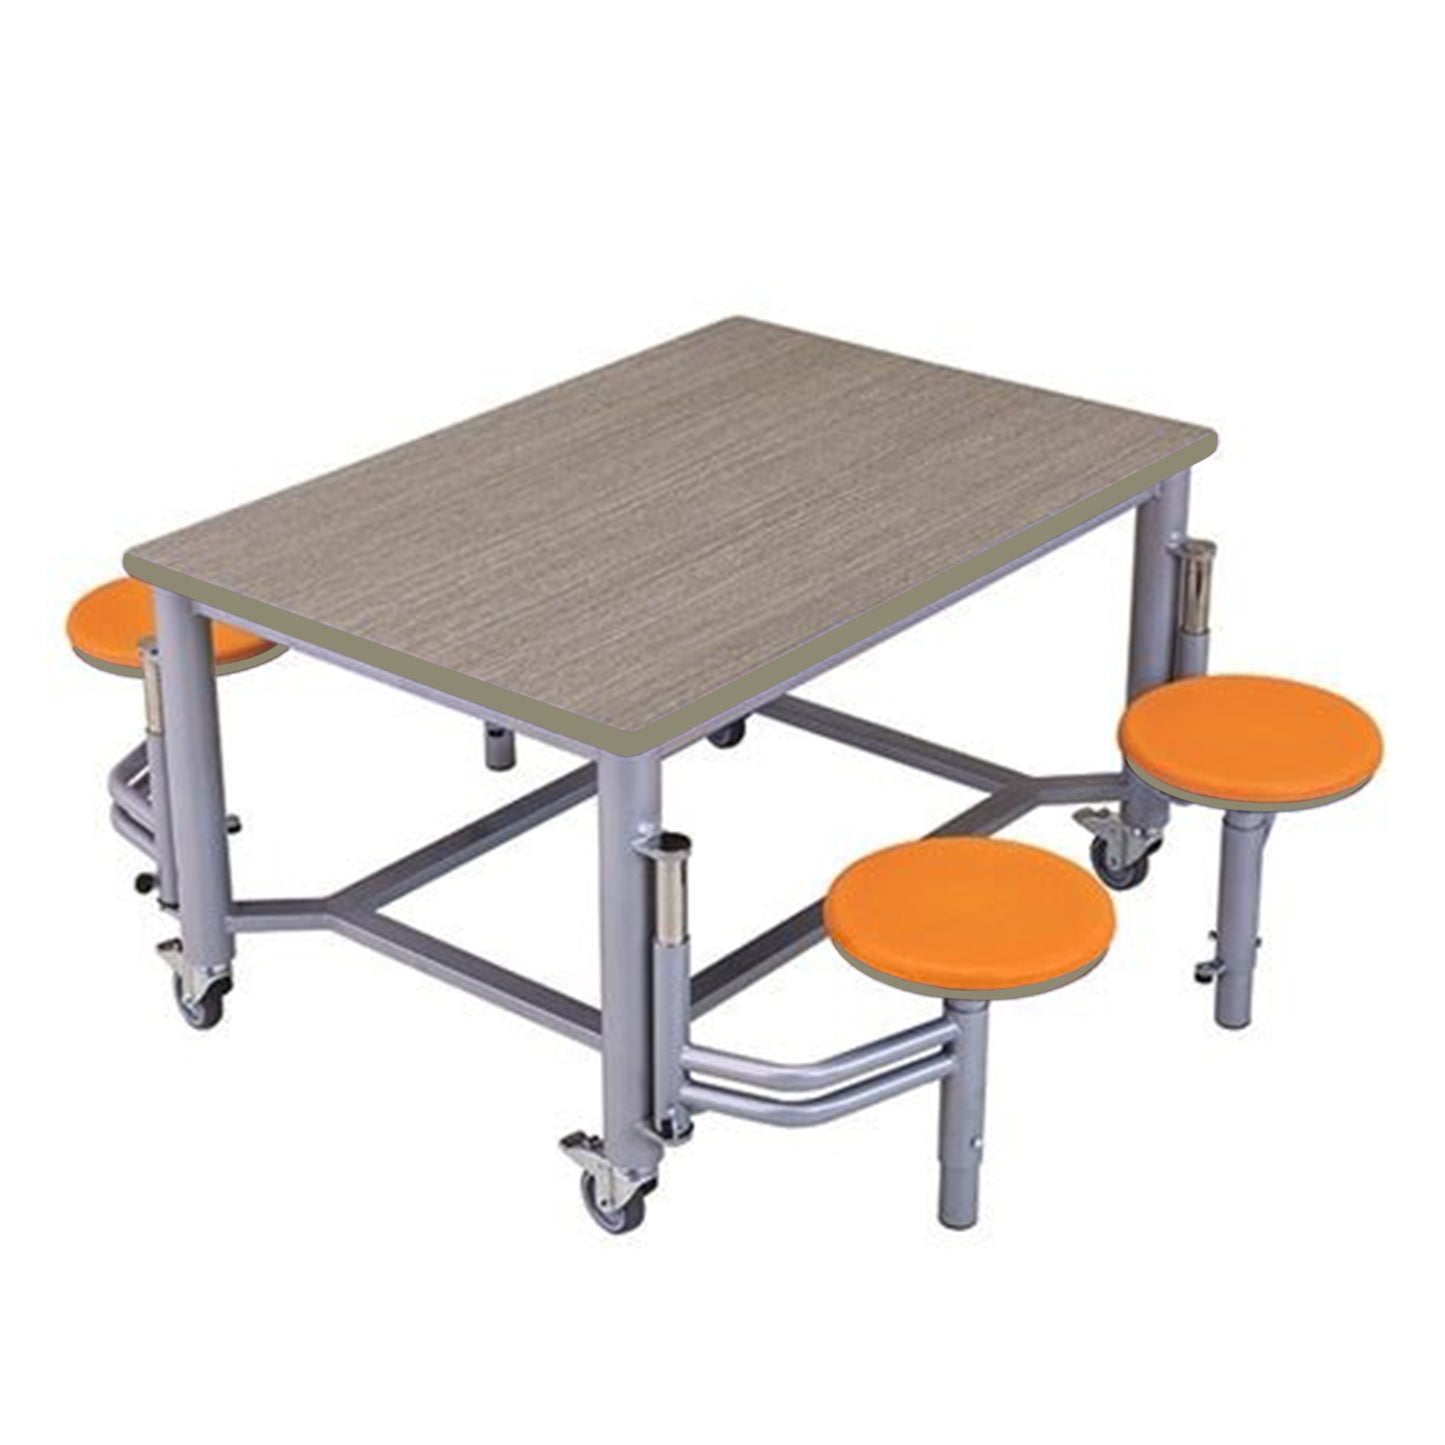 AmTab Mobile Stool Table - Group Collaboration High Table - 36"W x 52"L x 29"H - 4 Stools  (AMT-MGST3652-29)